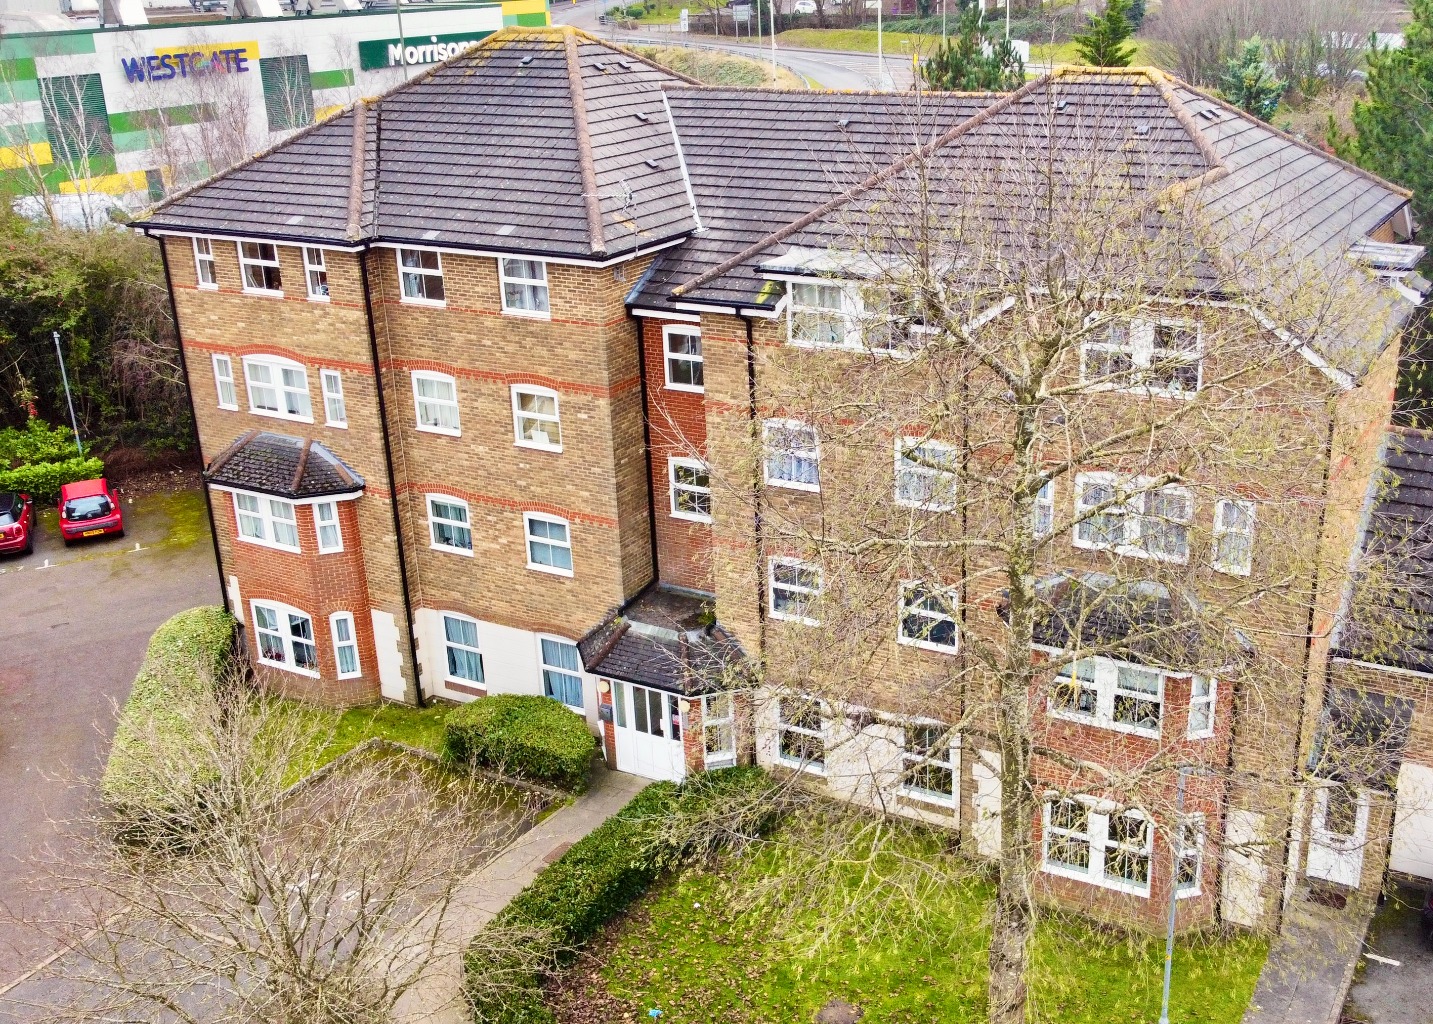 A bright and spacious two bedroom 2nd floor apartment with garden views and benefitting from a long lease of 163 years. This is perfect for first time buyers and investors for both its size and space, low charges and its central location to the town centre and easy reach to the countryside...